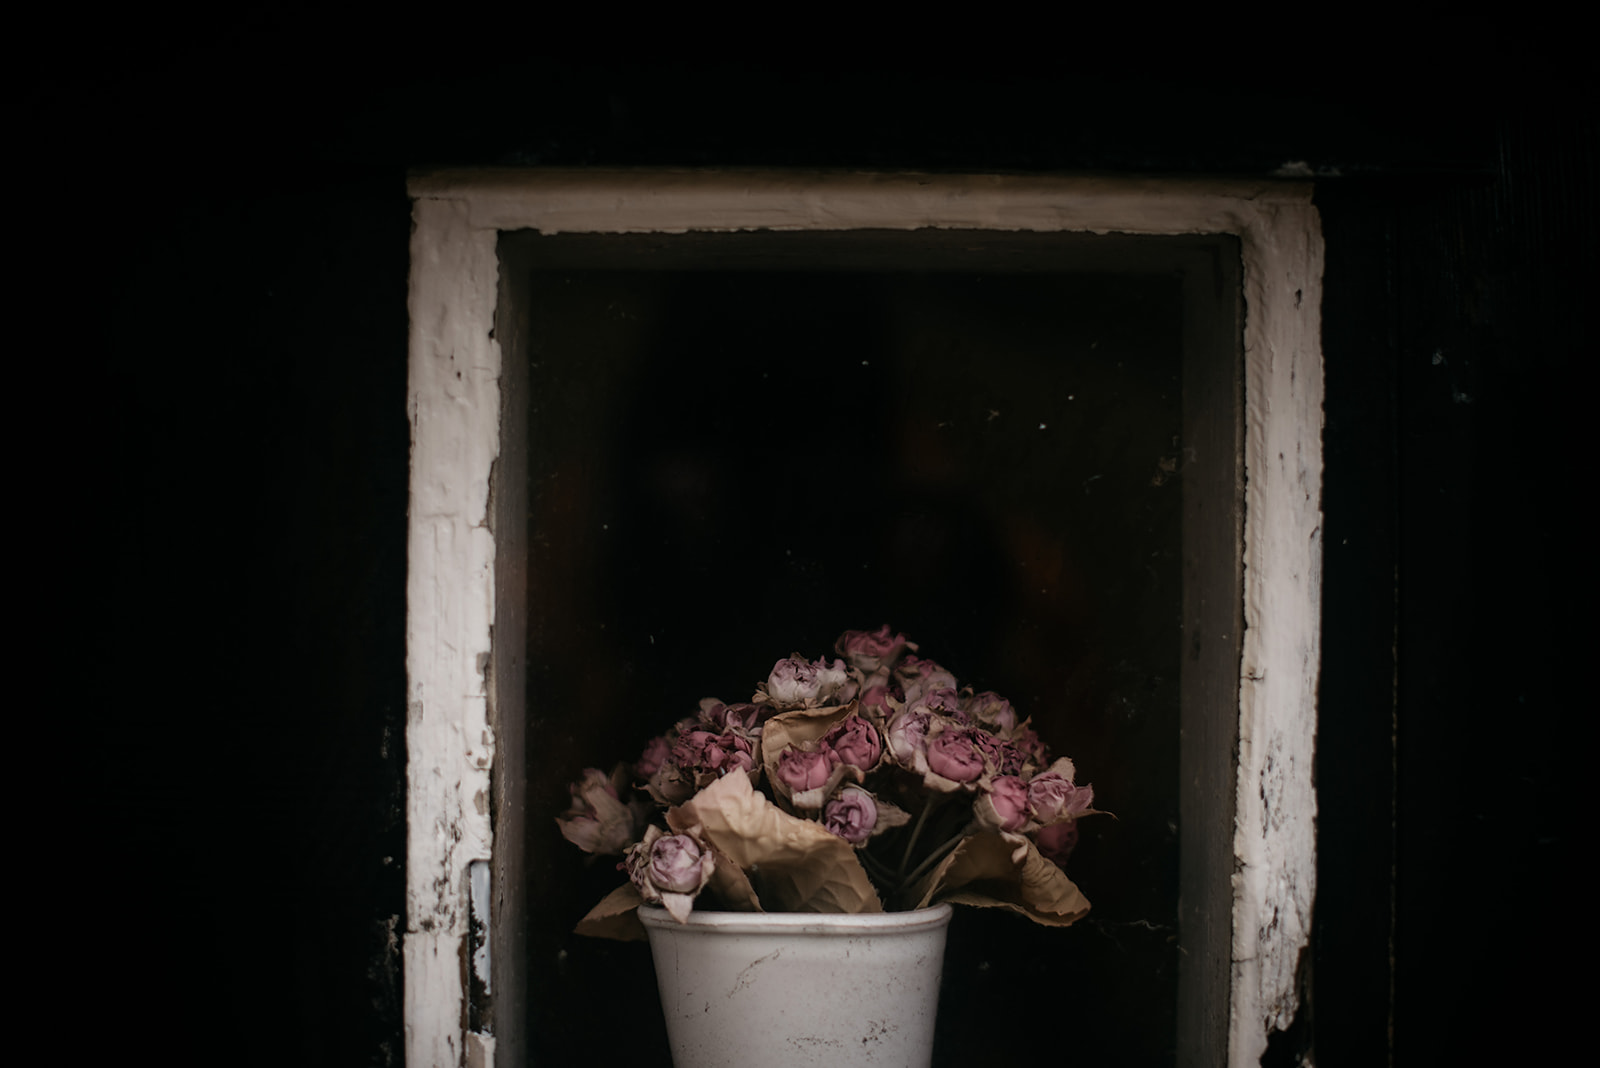 Flower bouquet in small window of a wooden house